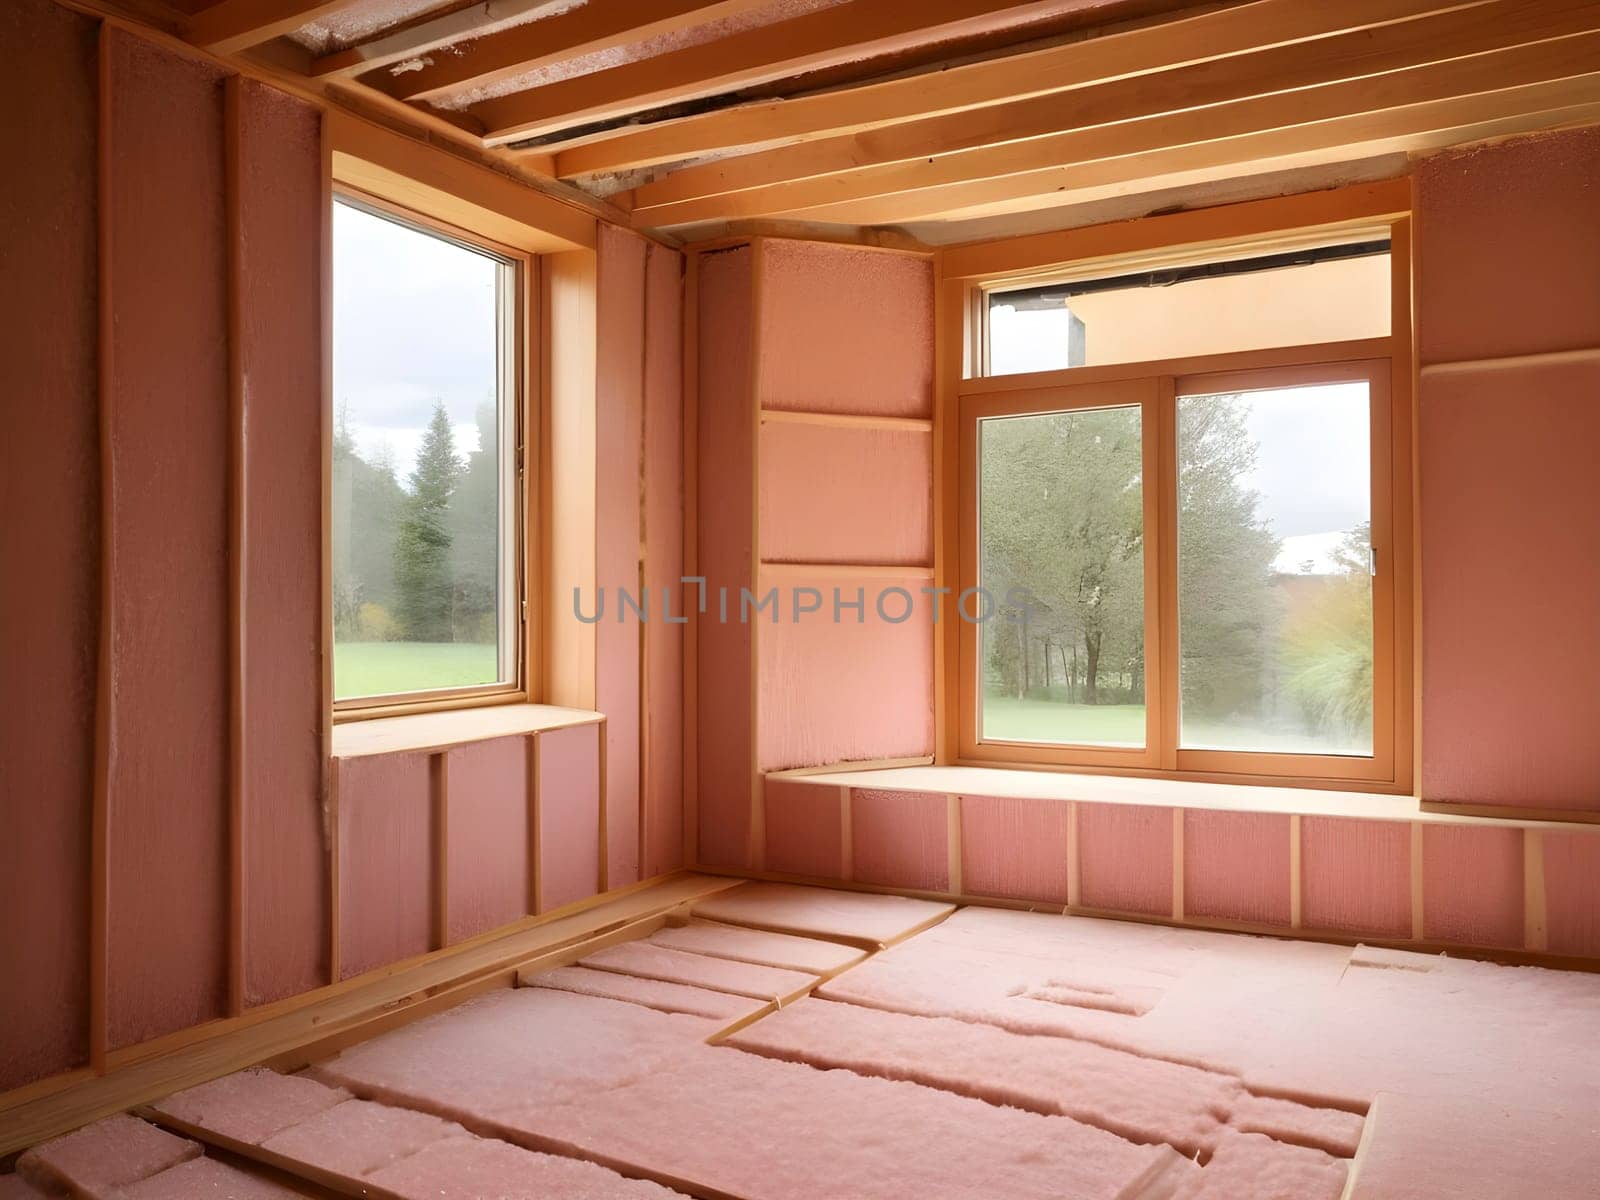 Warmth Within. The Art and Science of Thermal Insulation for Homes.